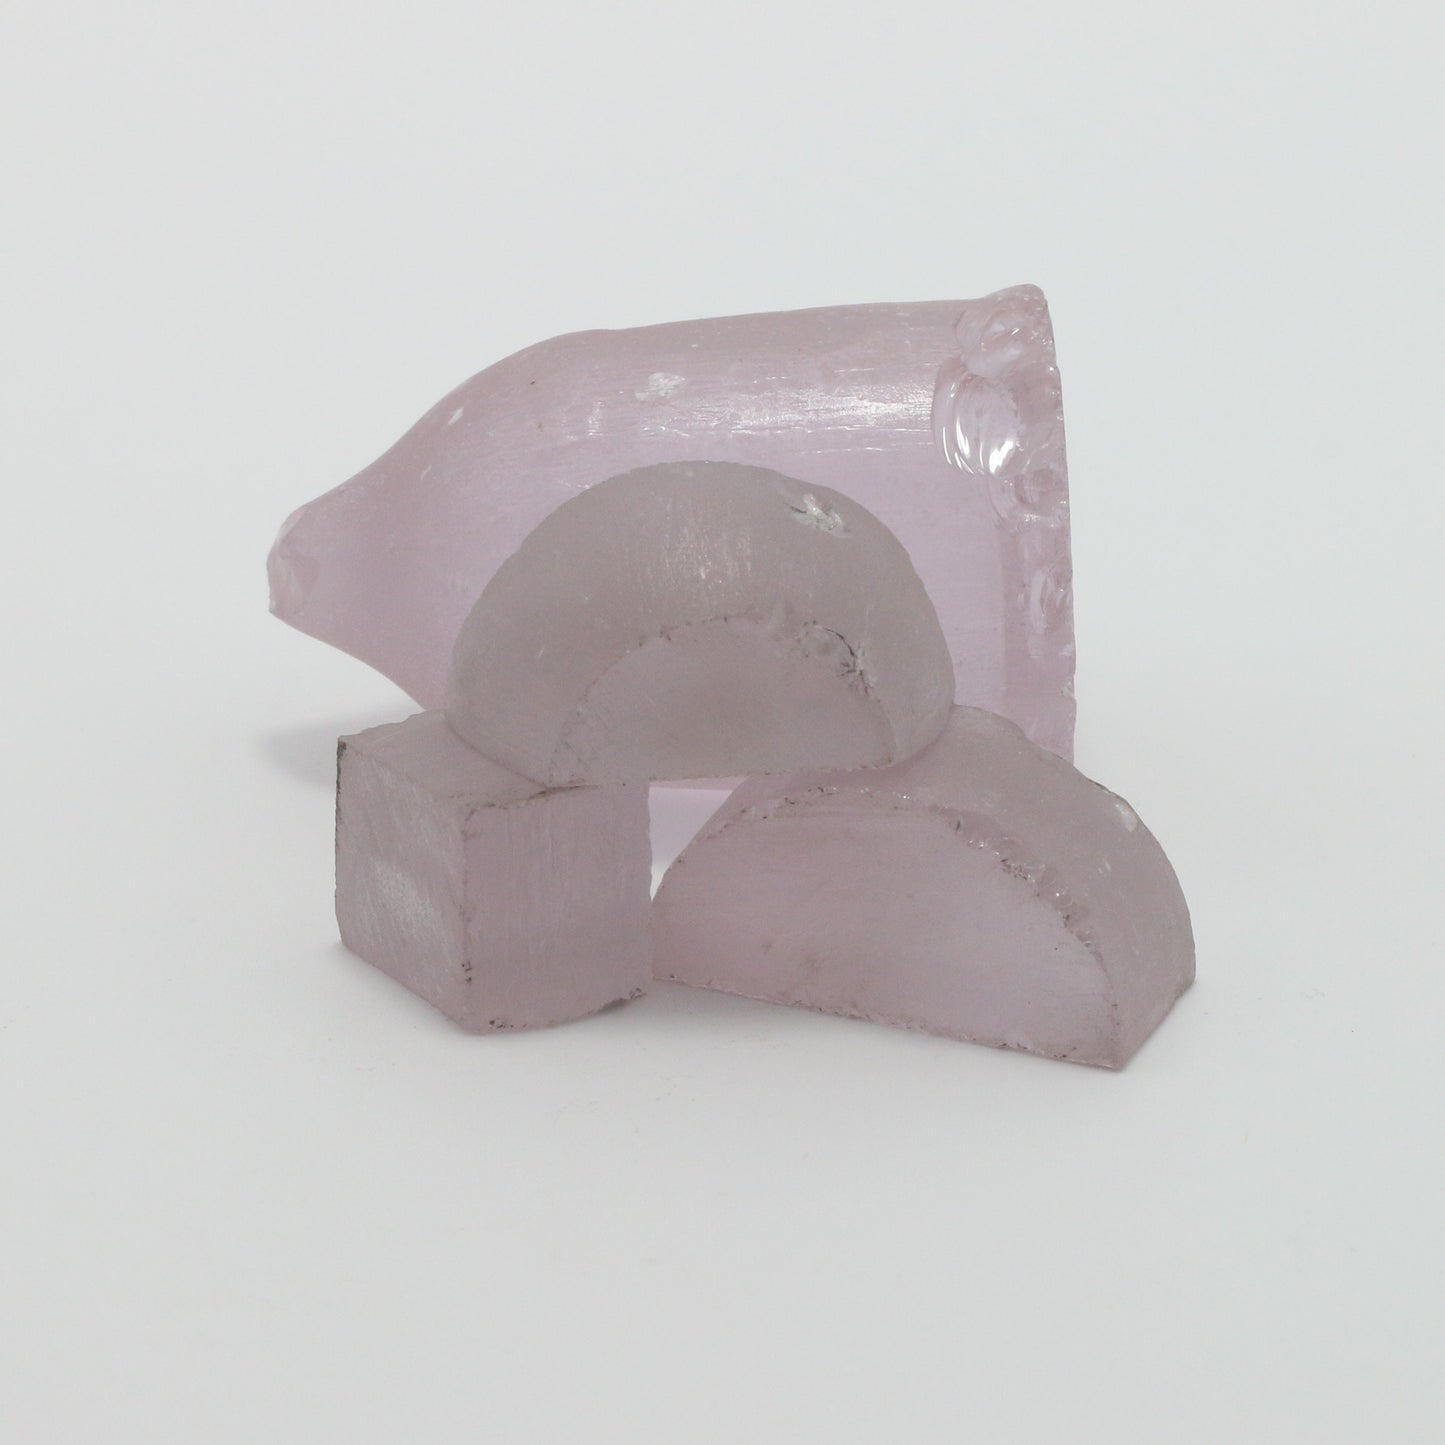 Lavender Nd:YAG Faceting Rough for Gem Cutting - Various Sizes